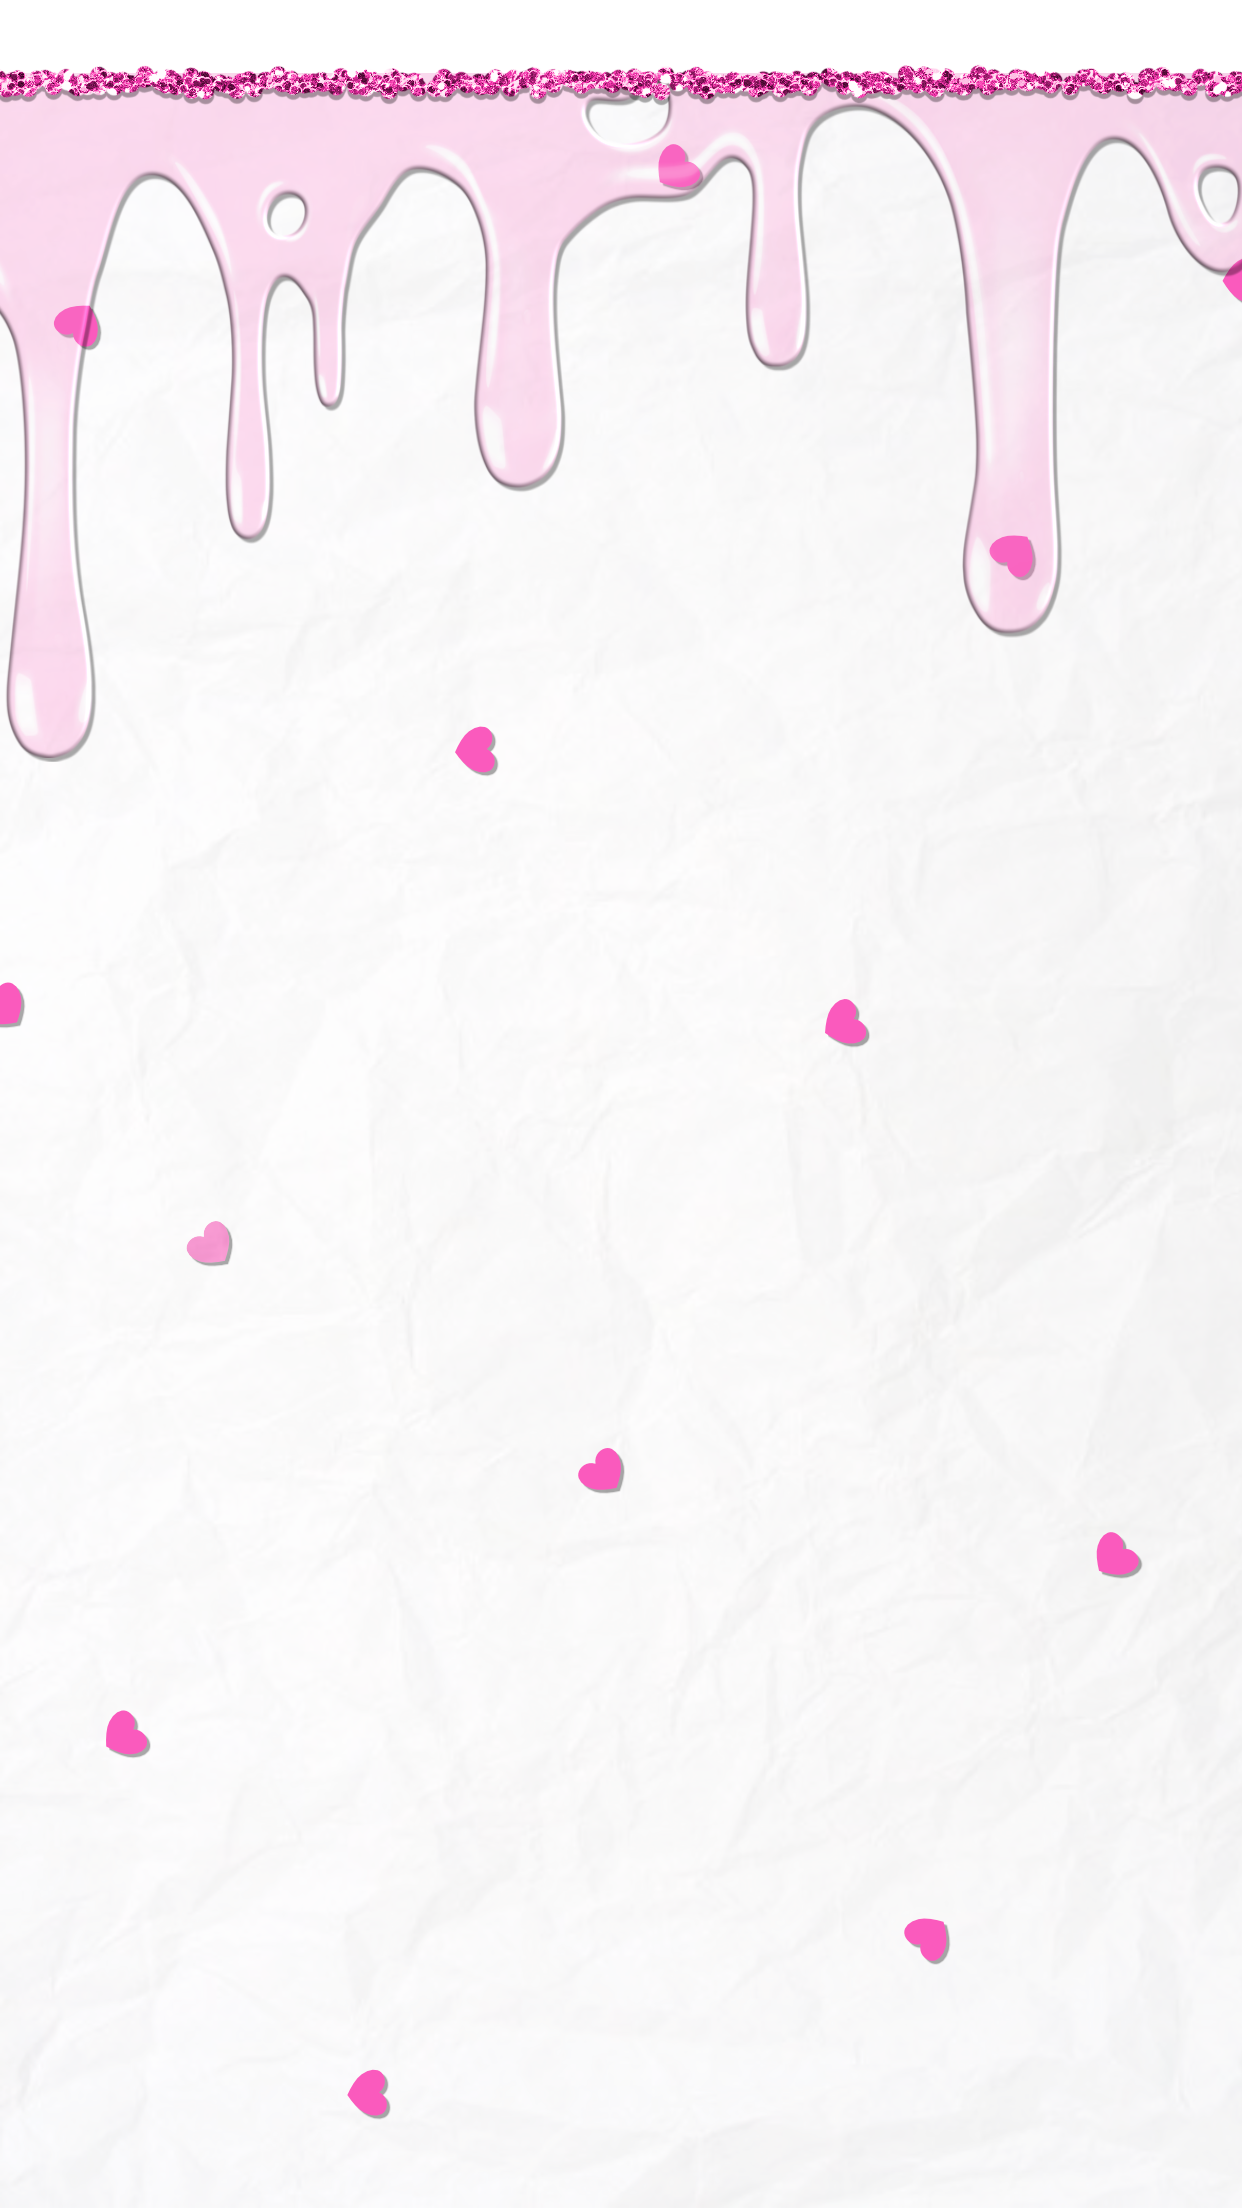 Simple Cute White Pink Wallpaper. IPhone Homescreen Wallpaper, Pink Wallpaper, IPhone Wallpaper